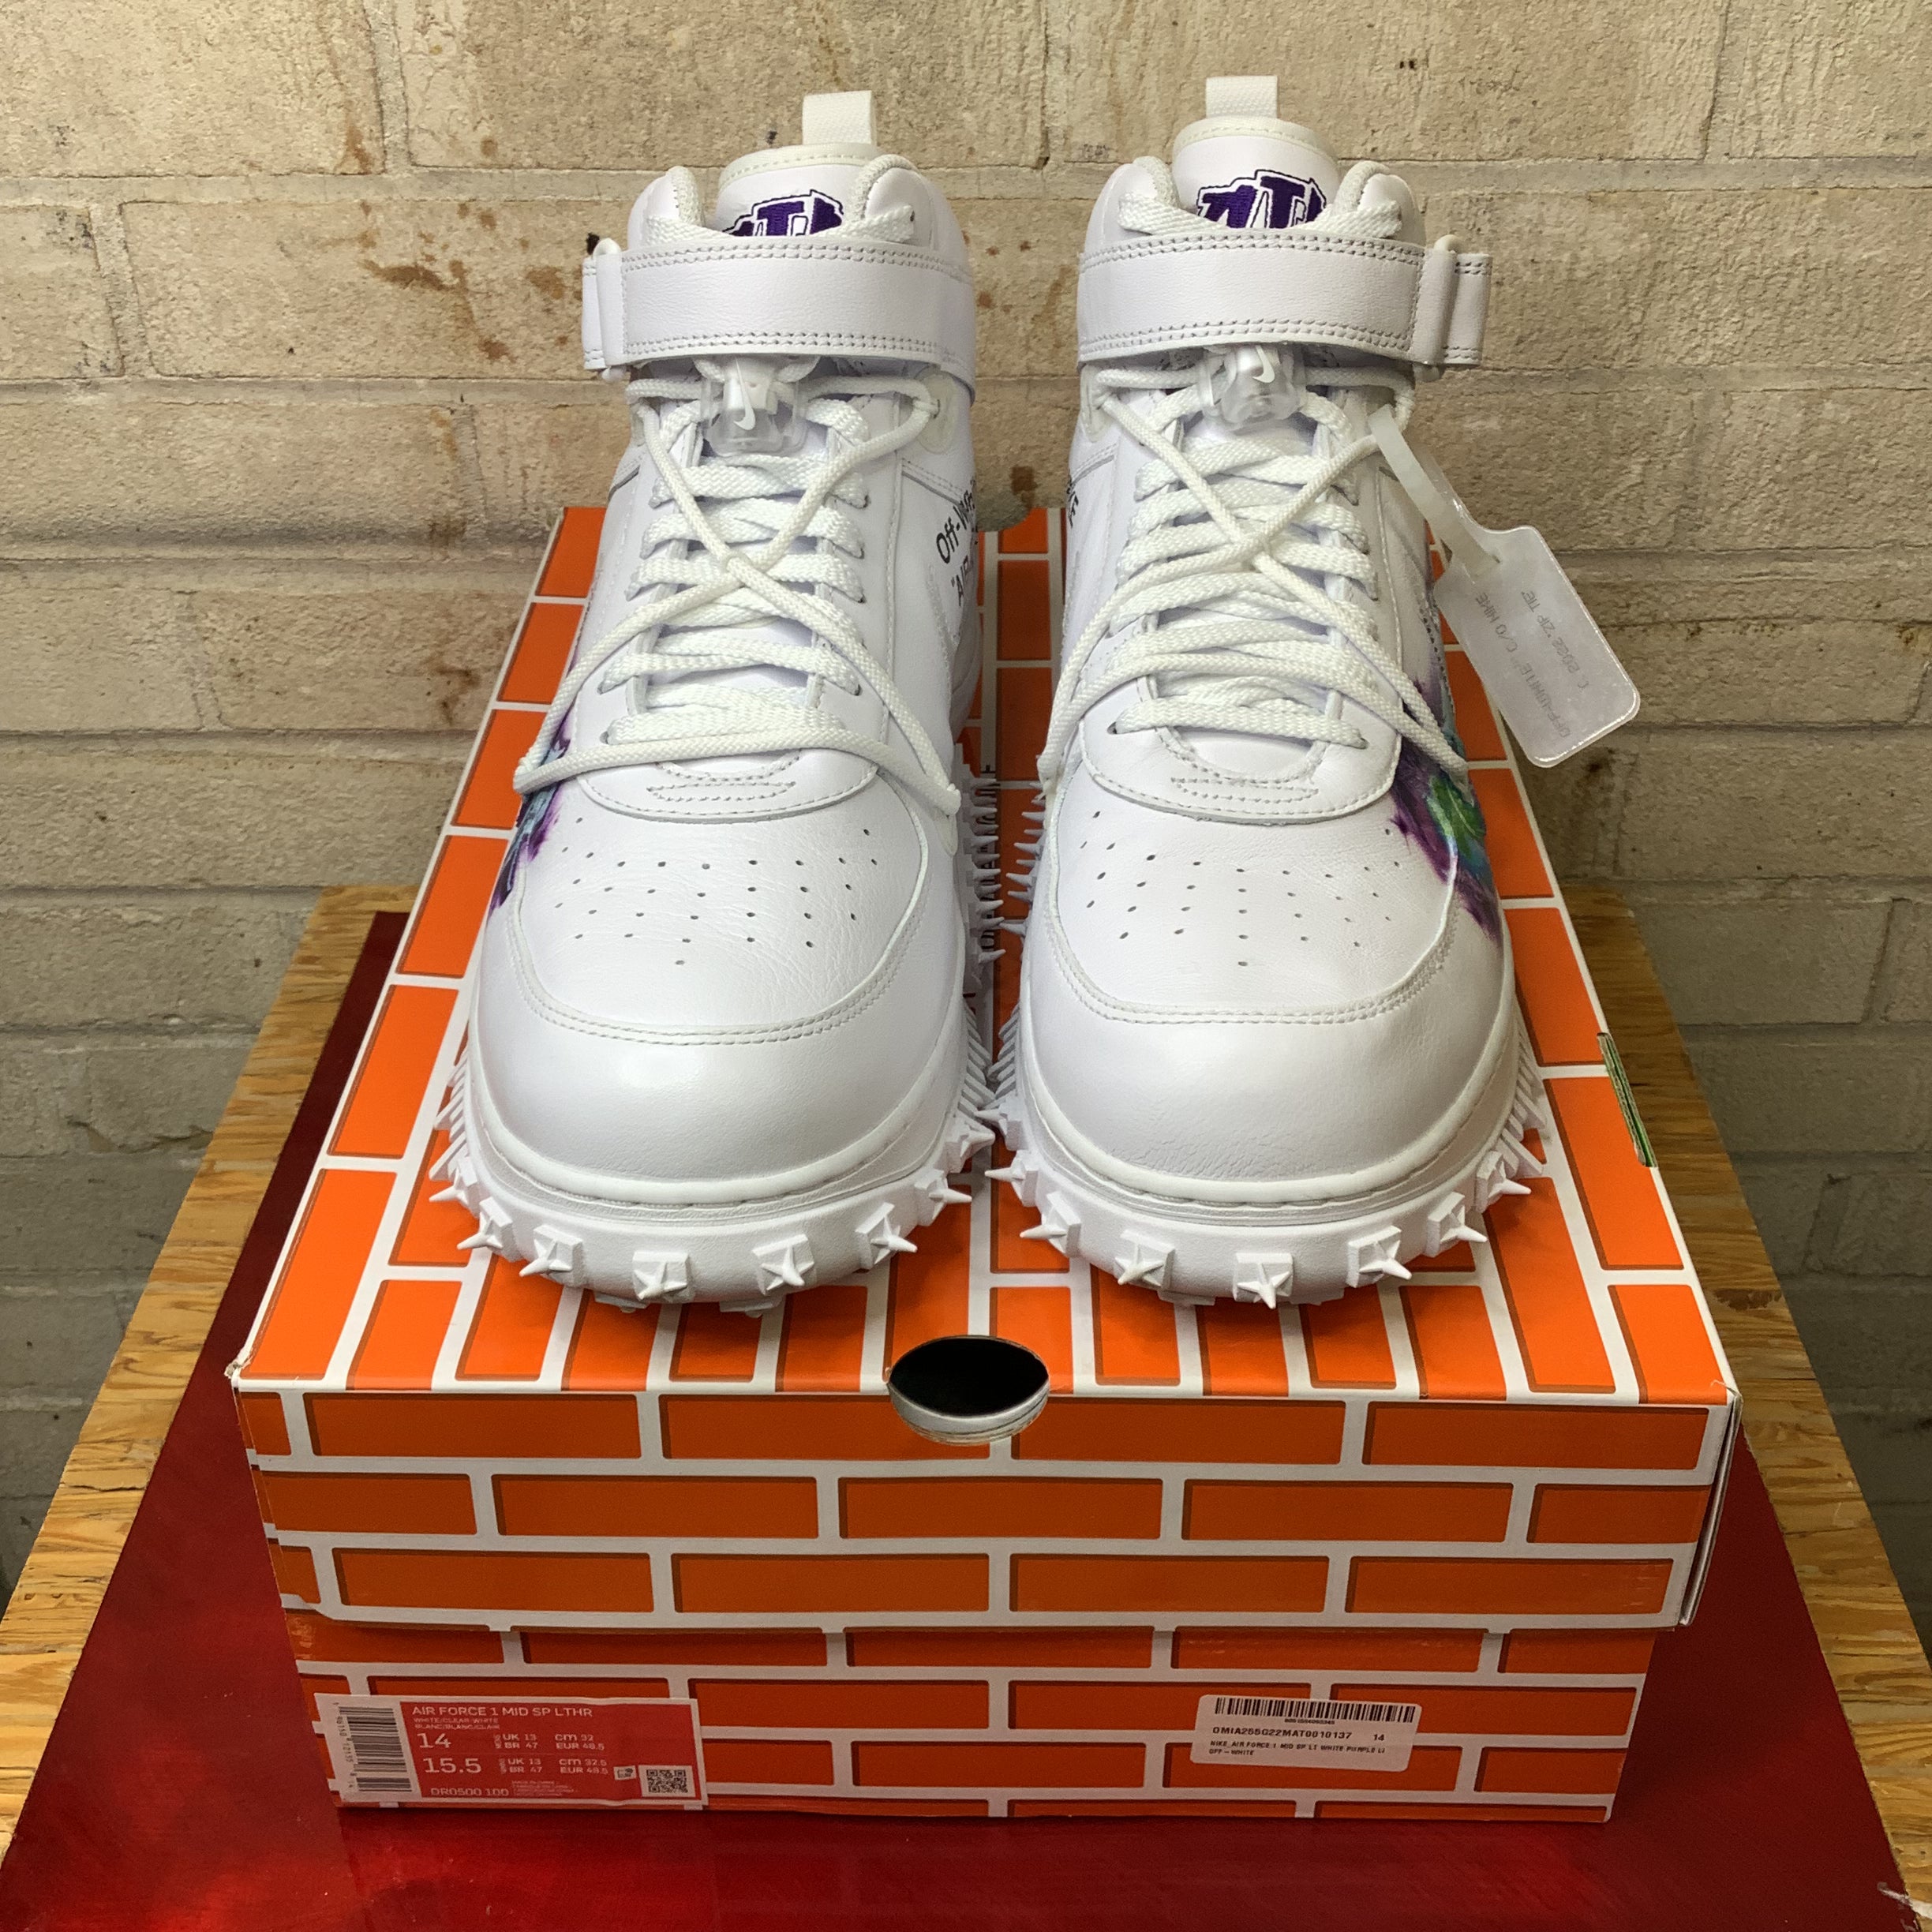 NIKE AIR FORCE 1 MID OFF WHITE GRAFFITI WHITE SIZE 14 DR0500-100